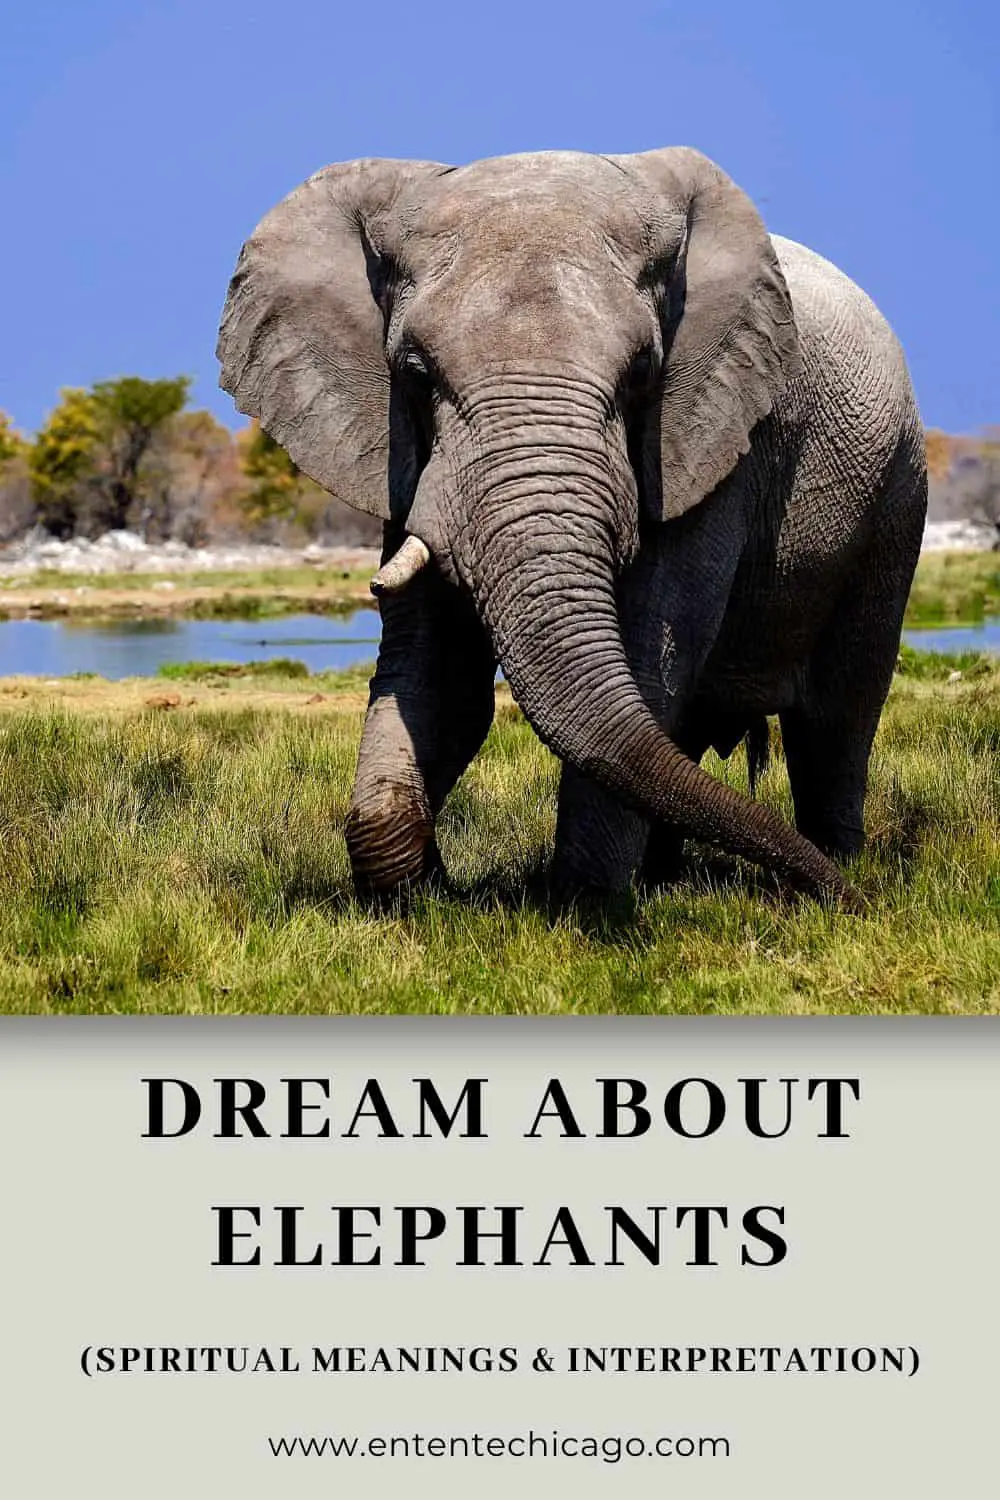 Meaning Of White Elephant In Dreams